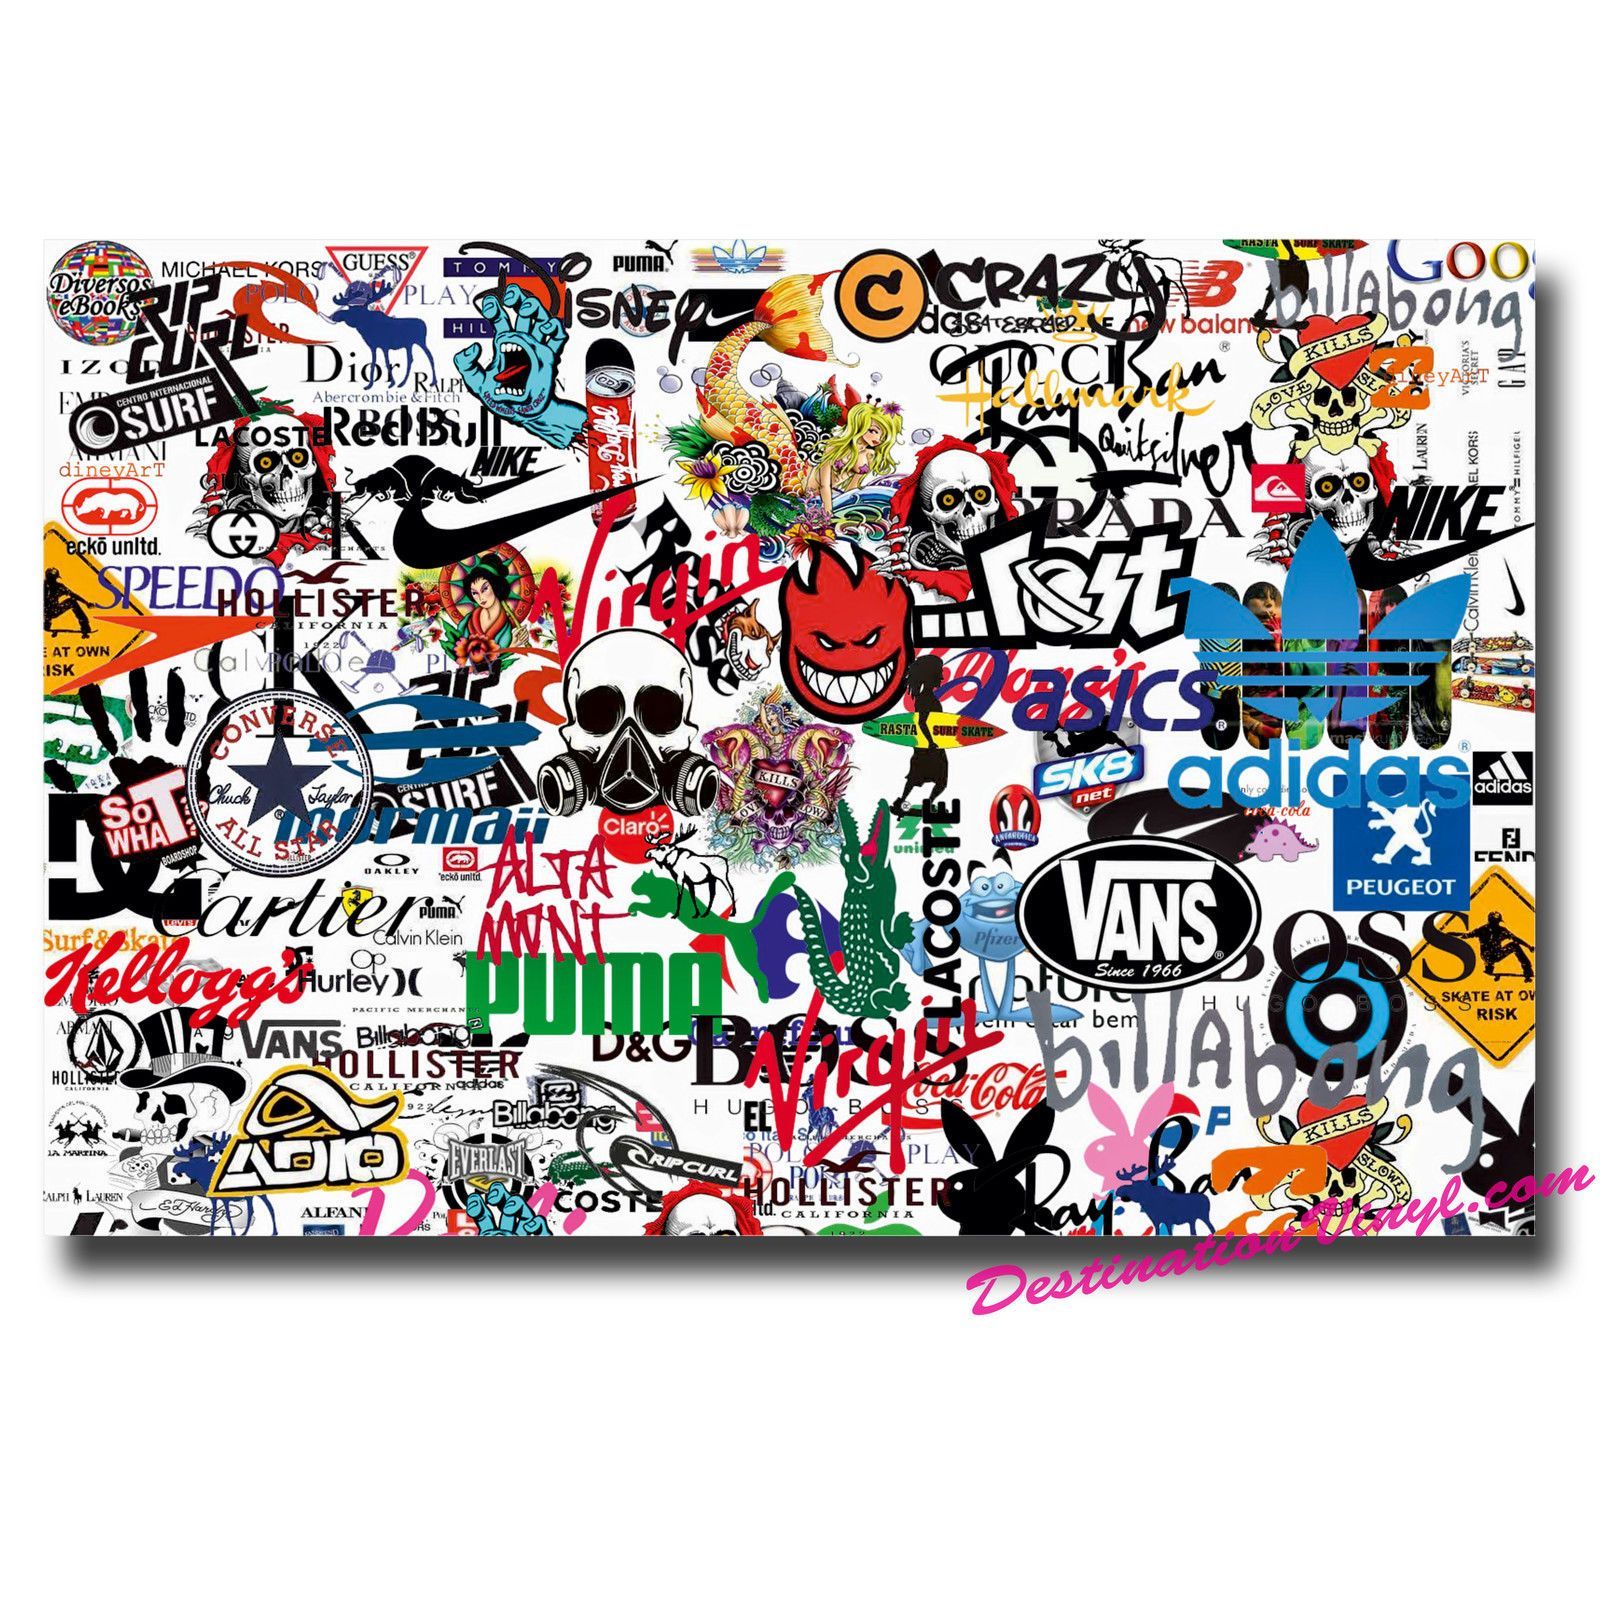 Waterproof Aesthetic Vinyl Decal Trendy Stickers Laptop Bottles Phone Graffiti Skateboard MacBook Patches Snowboar Car Bicycle Motorcycle Luggage Sticker for Teens Adults 137 PCS Cute Stickers